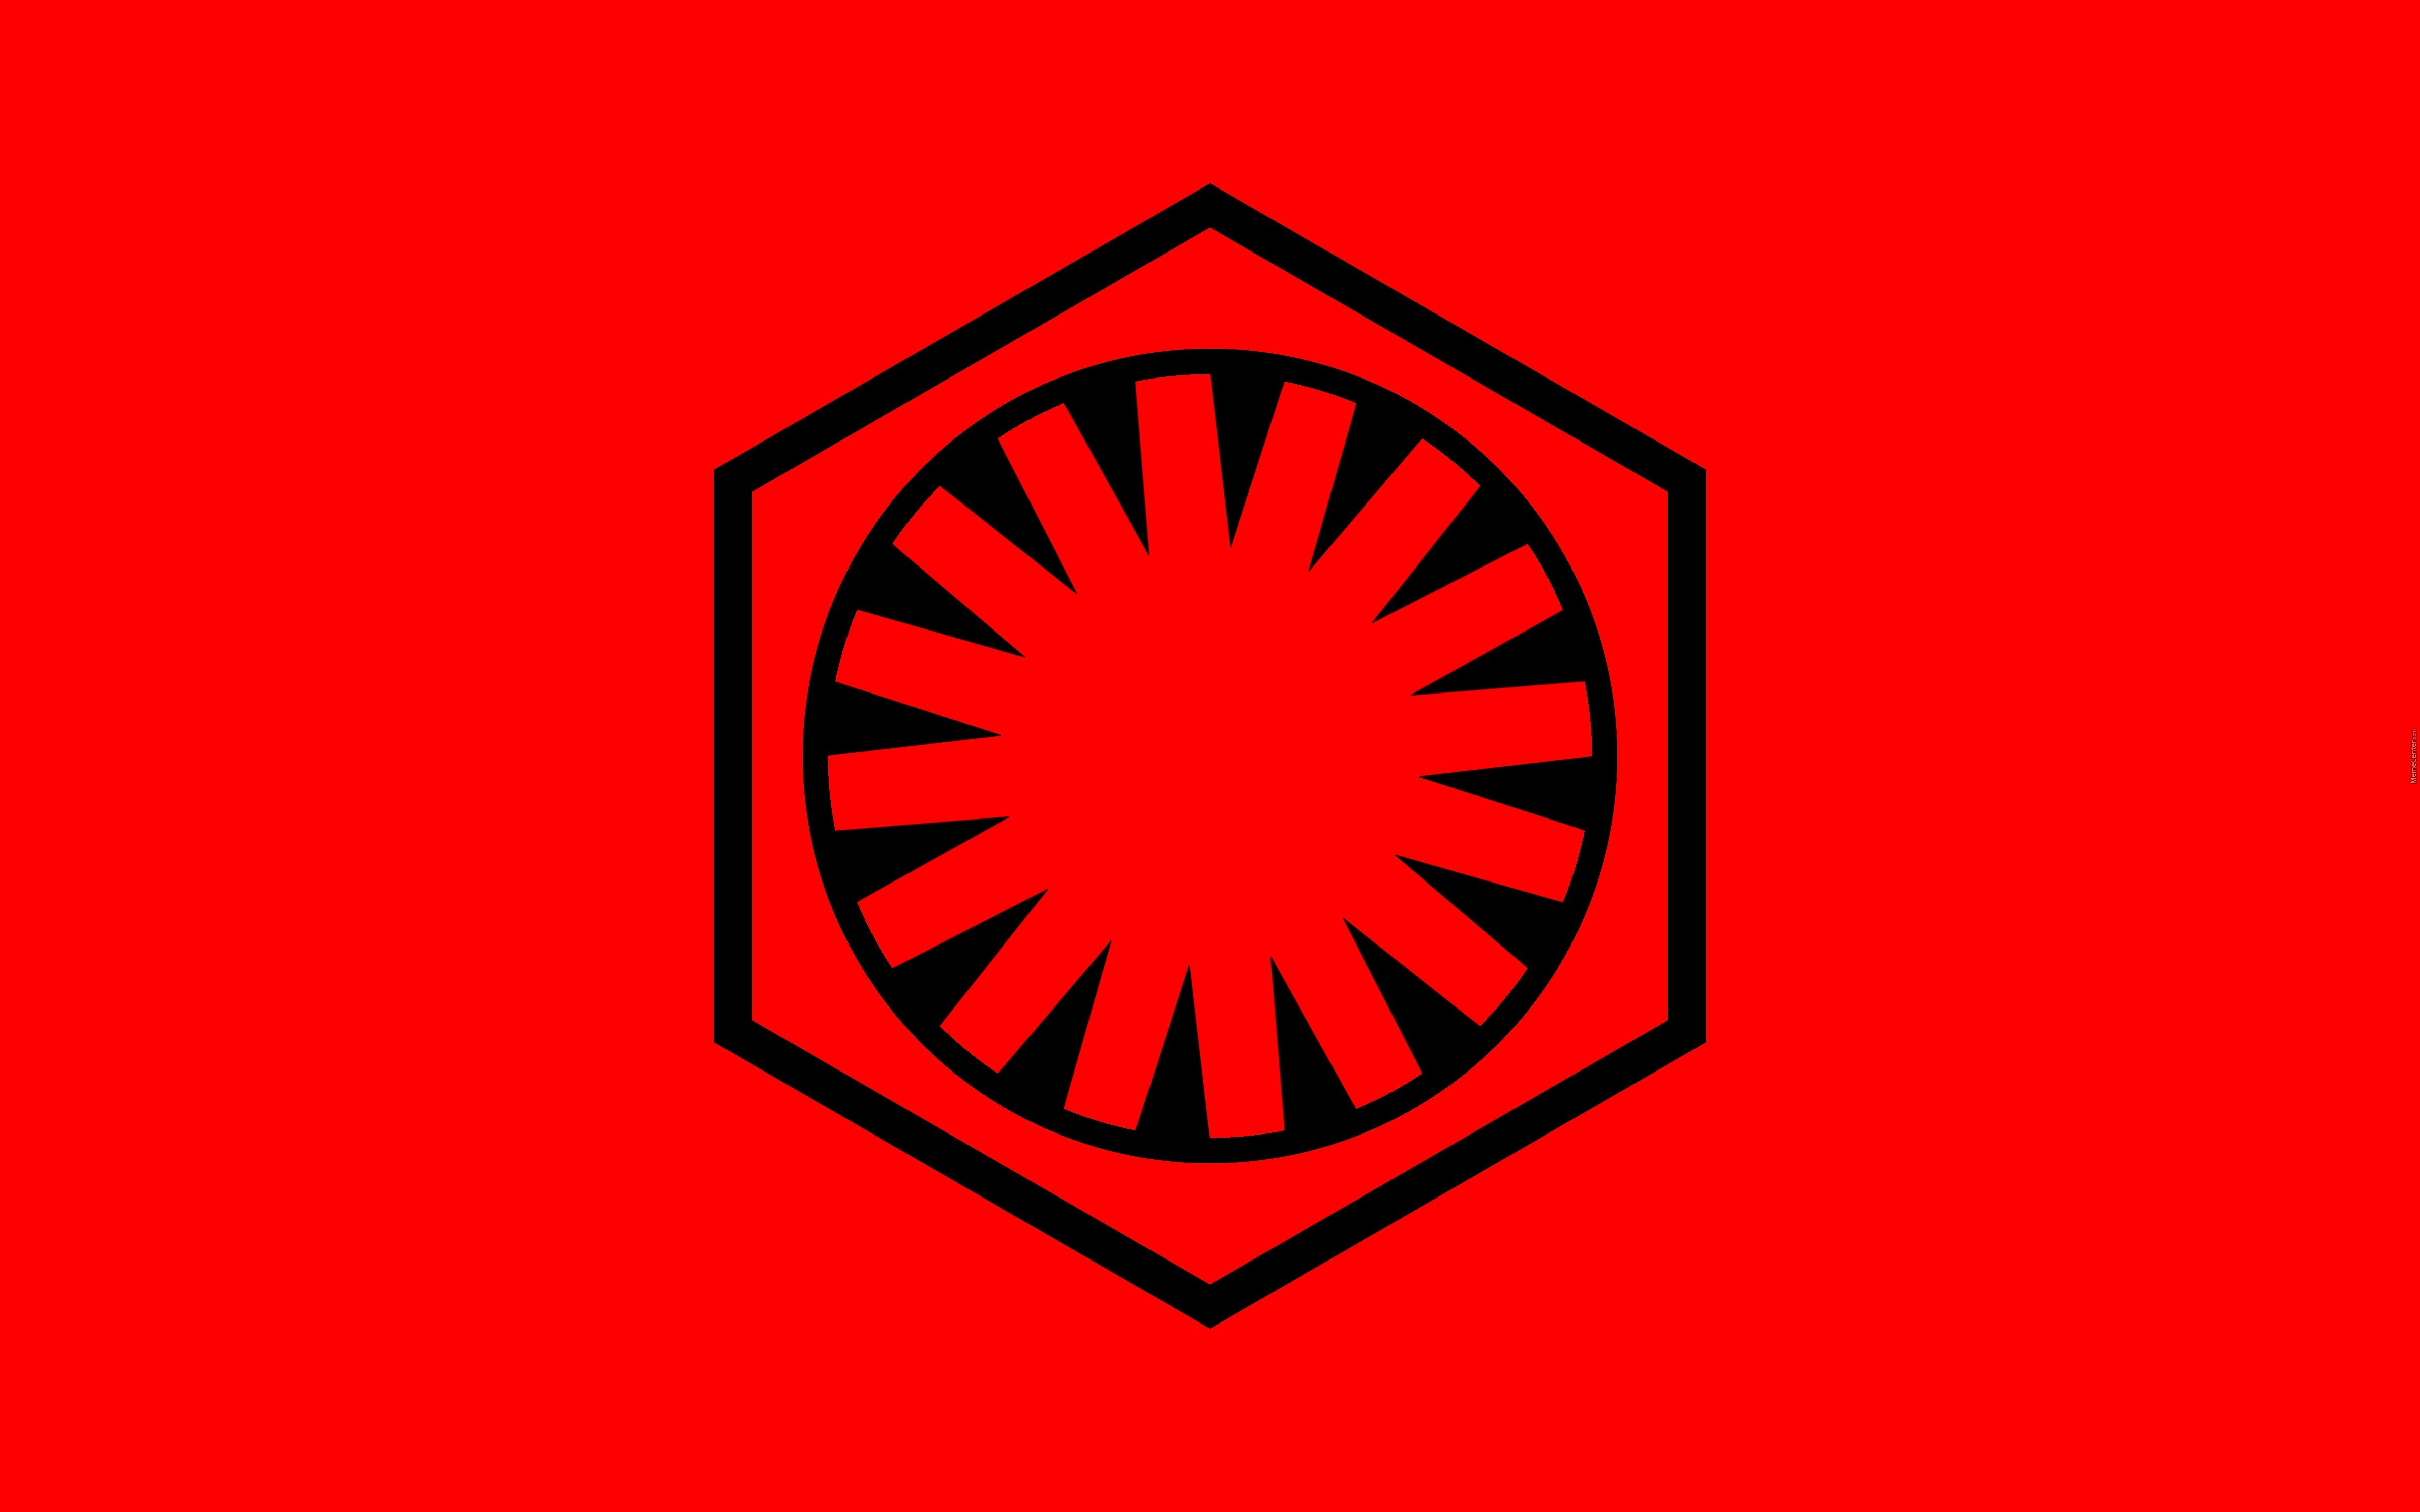 High Resolution Wallpaper | Imperial Crest 4800x3000 px